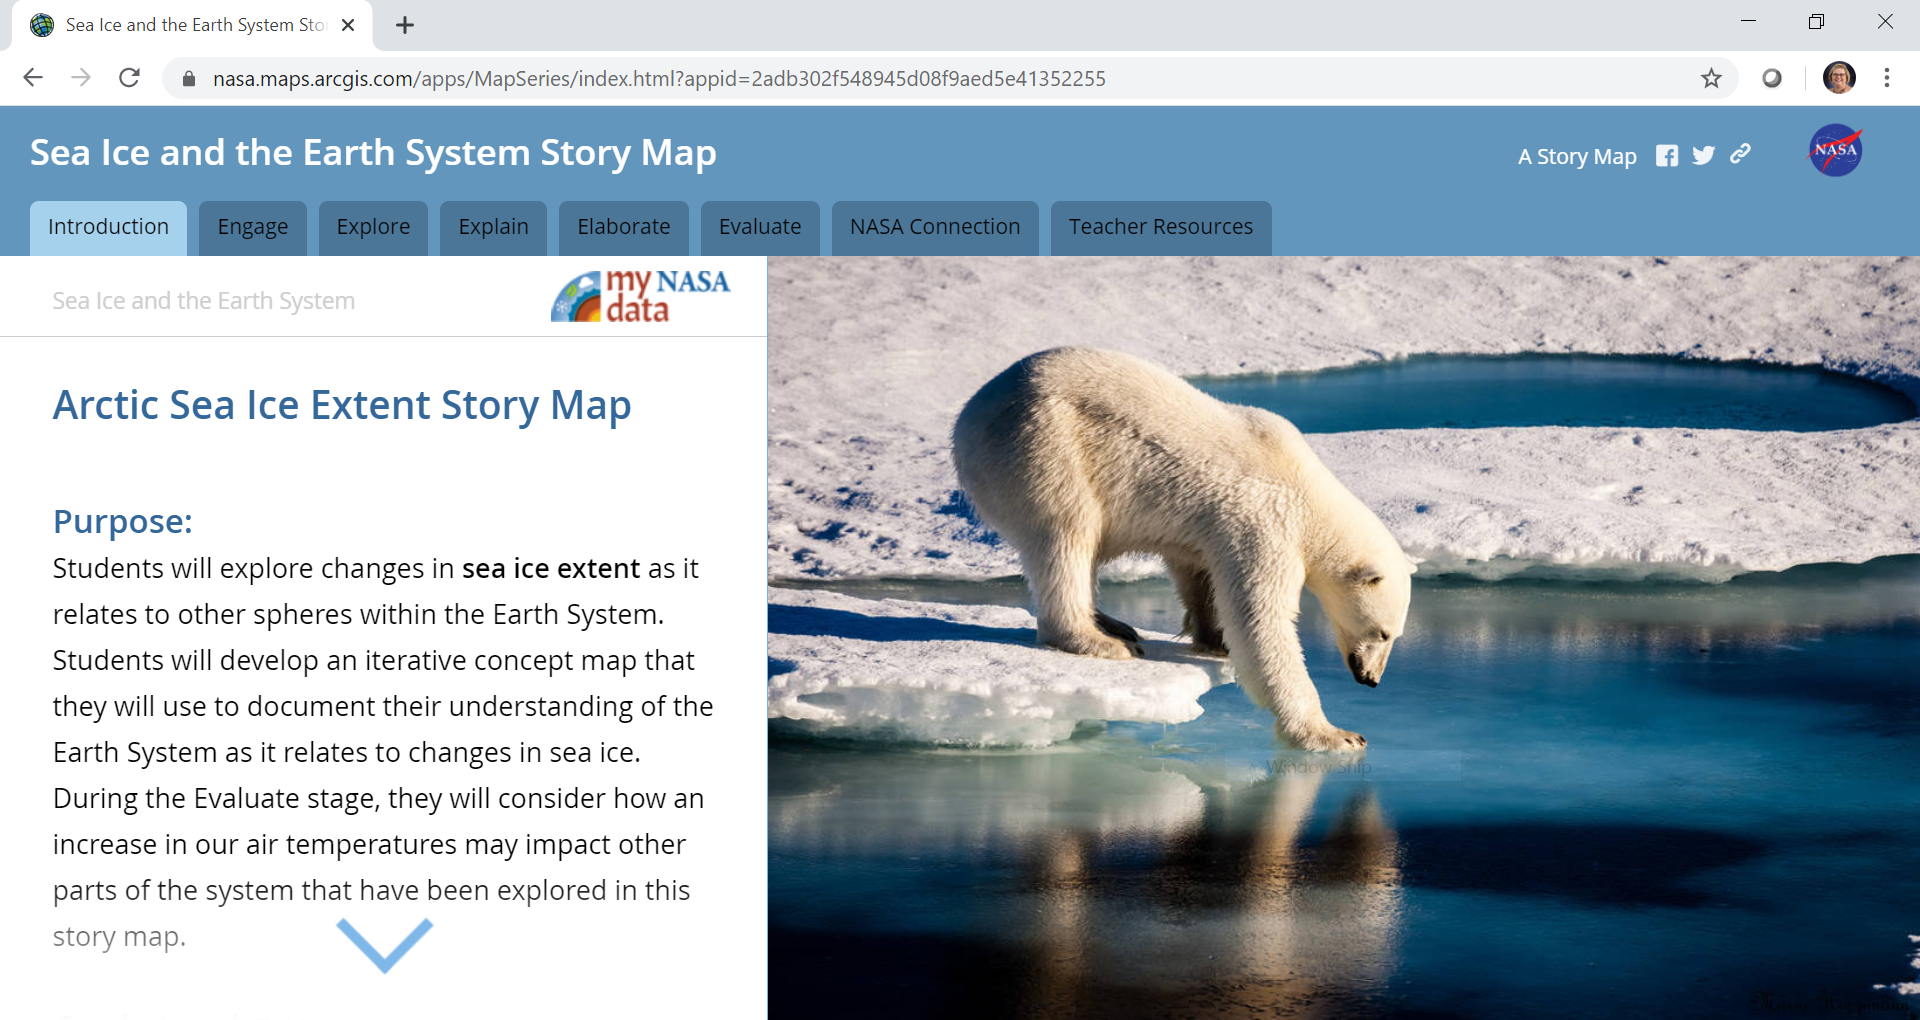 My NASA Data Sea Ice and the Earth System Story Map Image